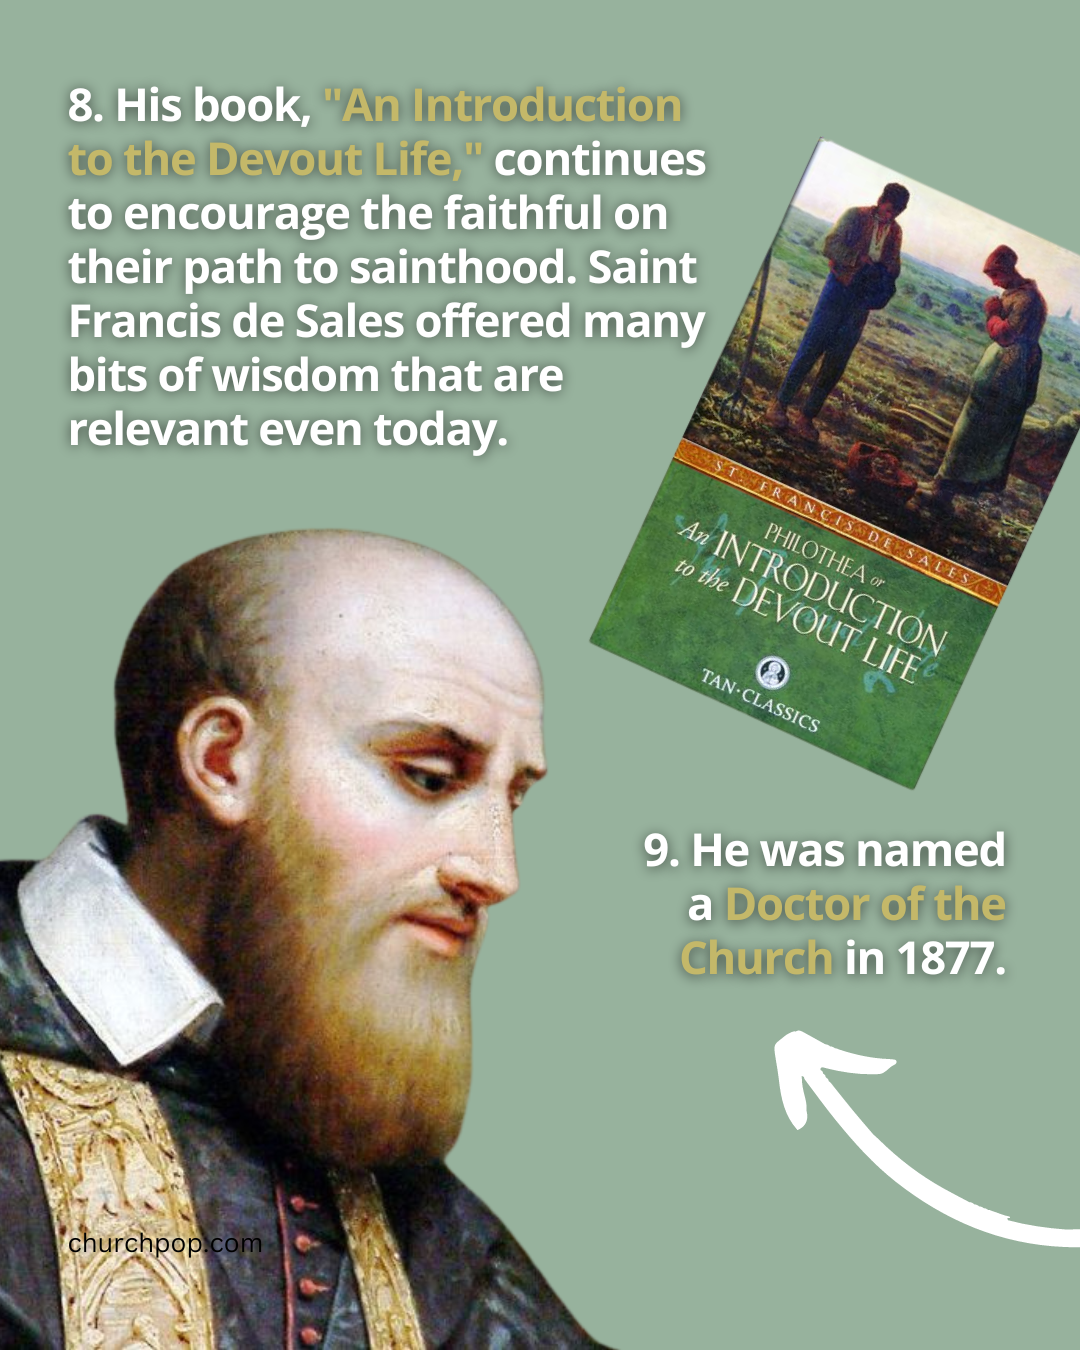 francis de sales introduction to the devout life, francis de sales introduction to the devout life, doctor of the church